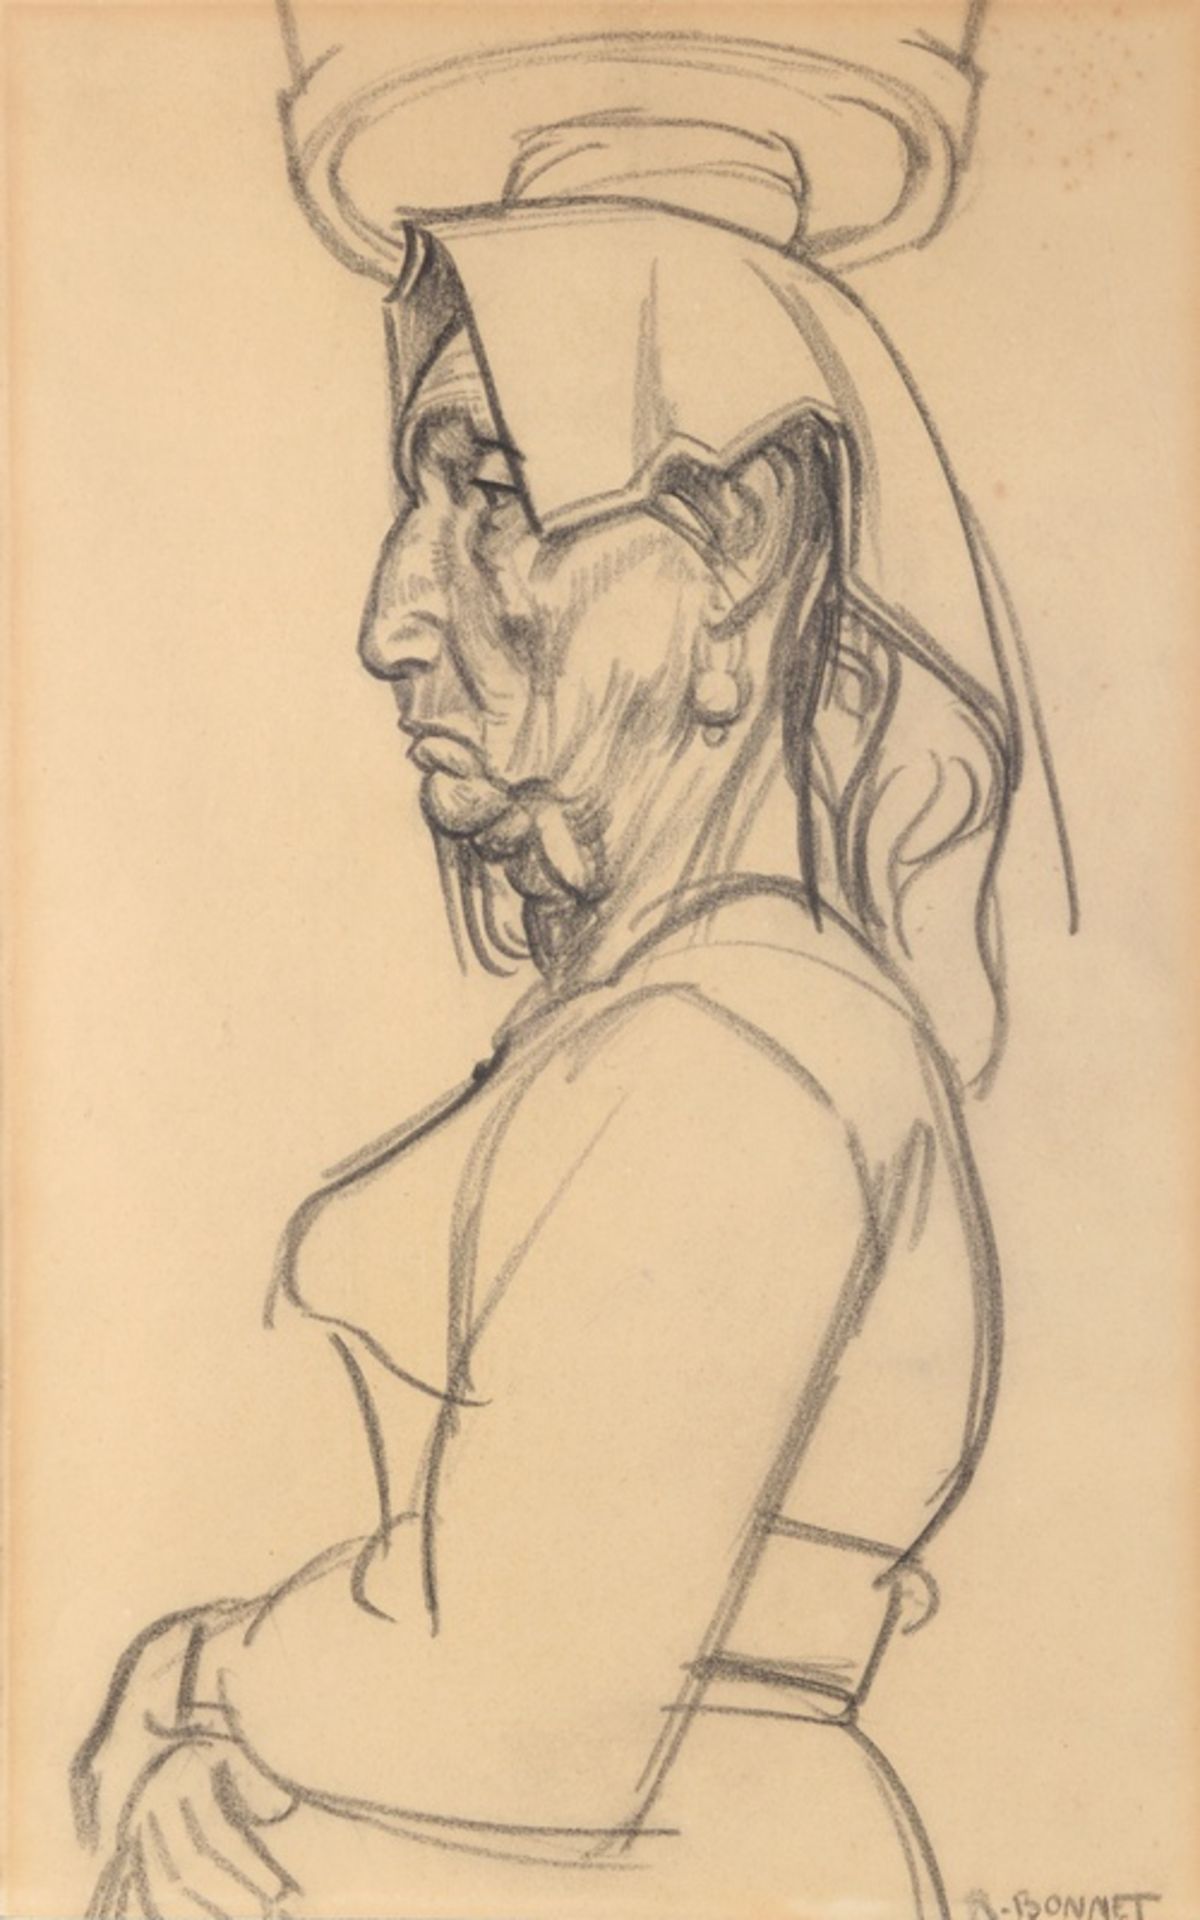 Rudolf Bonnet (1895-1978), 'Italian woman', signed lower right, charcoal on paper, 42 x 26 cm.